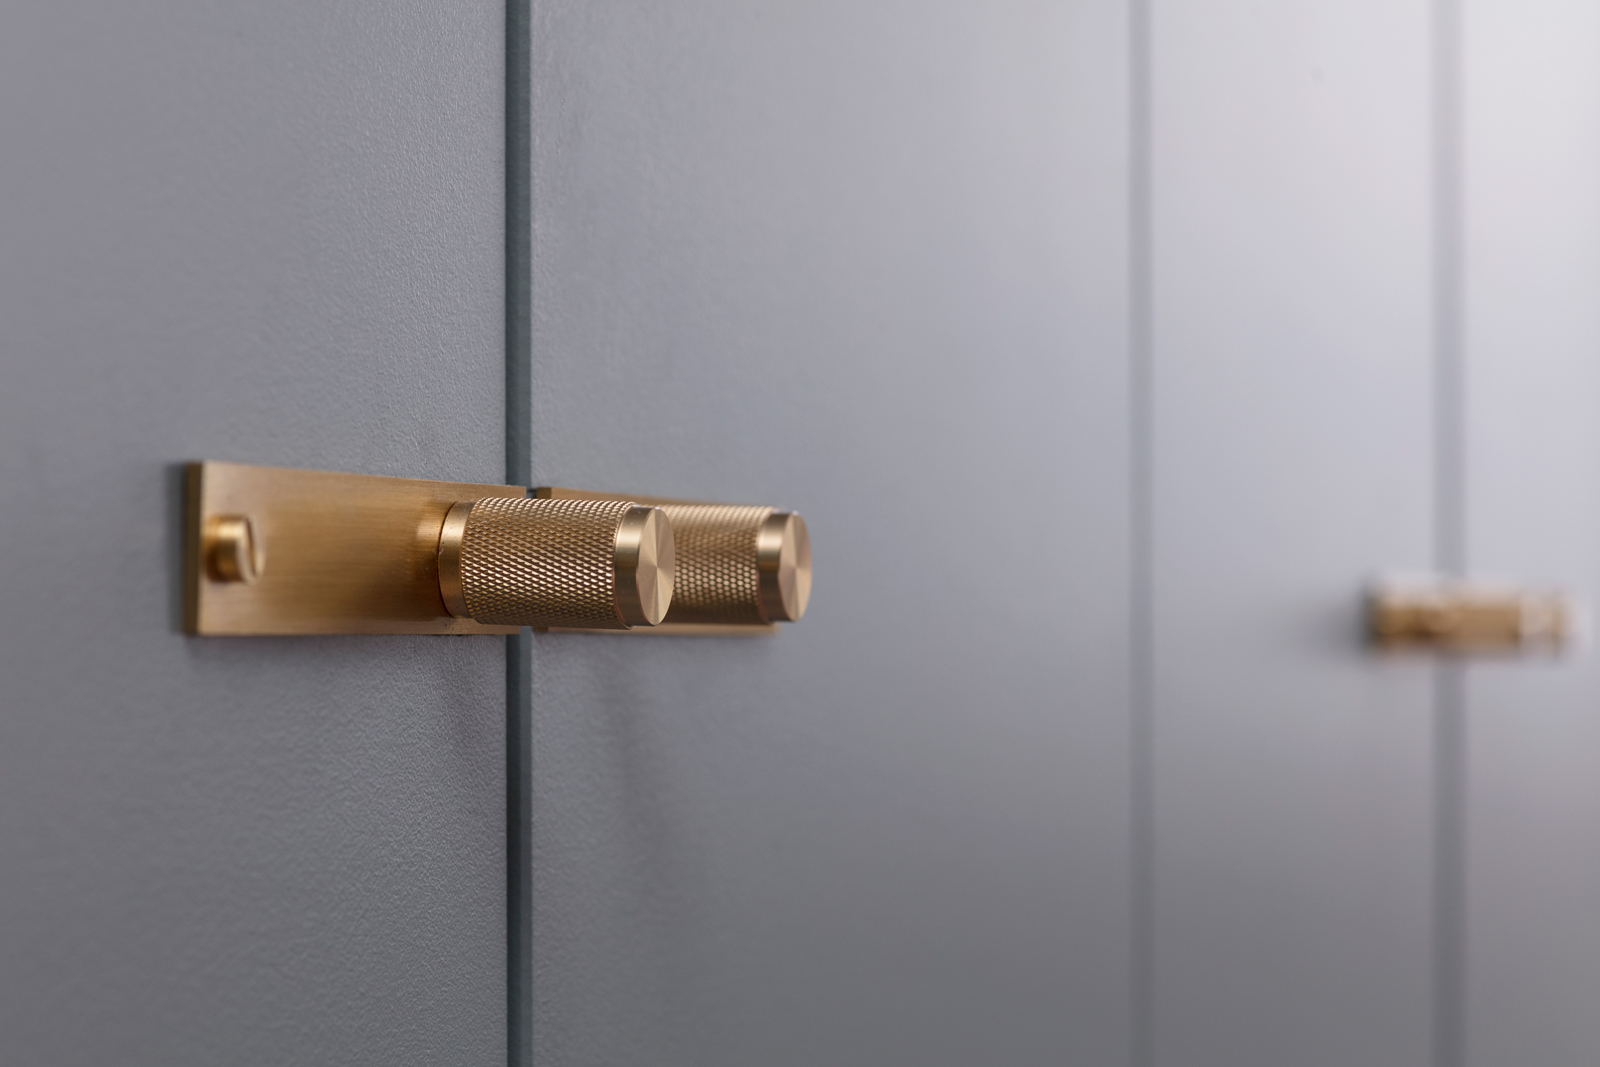 Buster + Punch brass handles on a blue fitted wardrobe